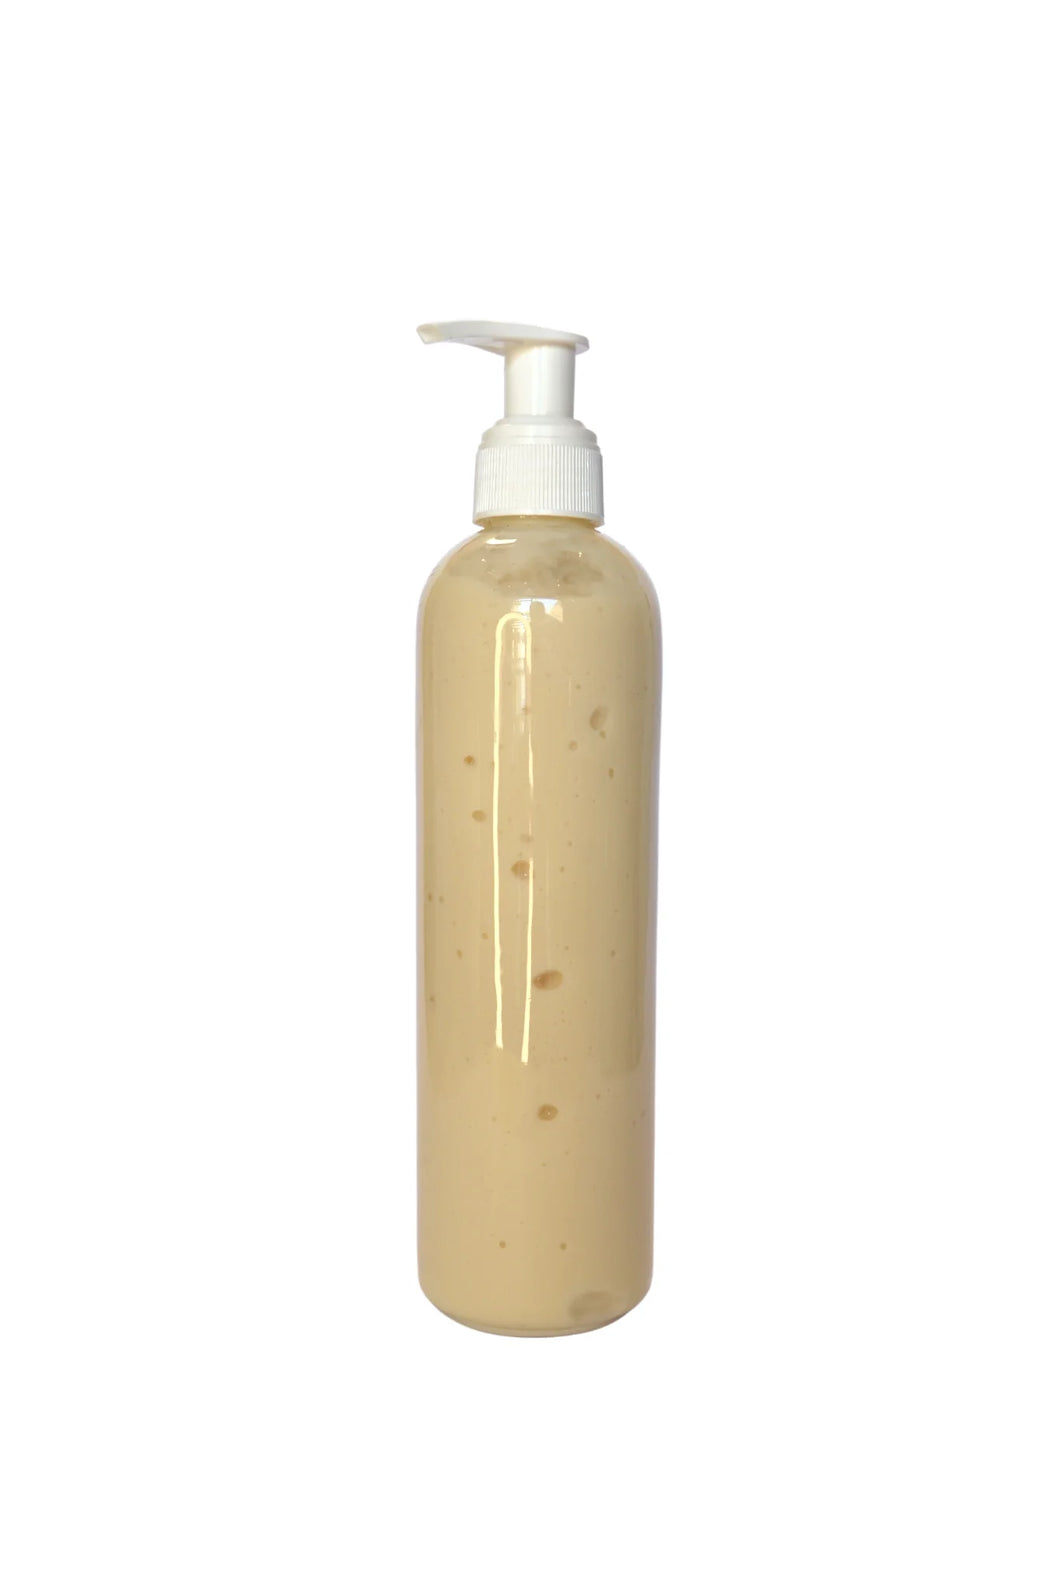 Moringa and lemongrass body lotion enriched with vitamin e for glowing skin